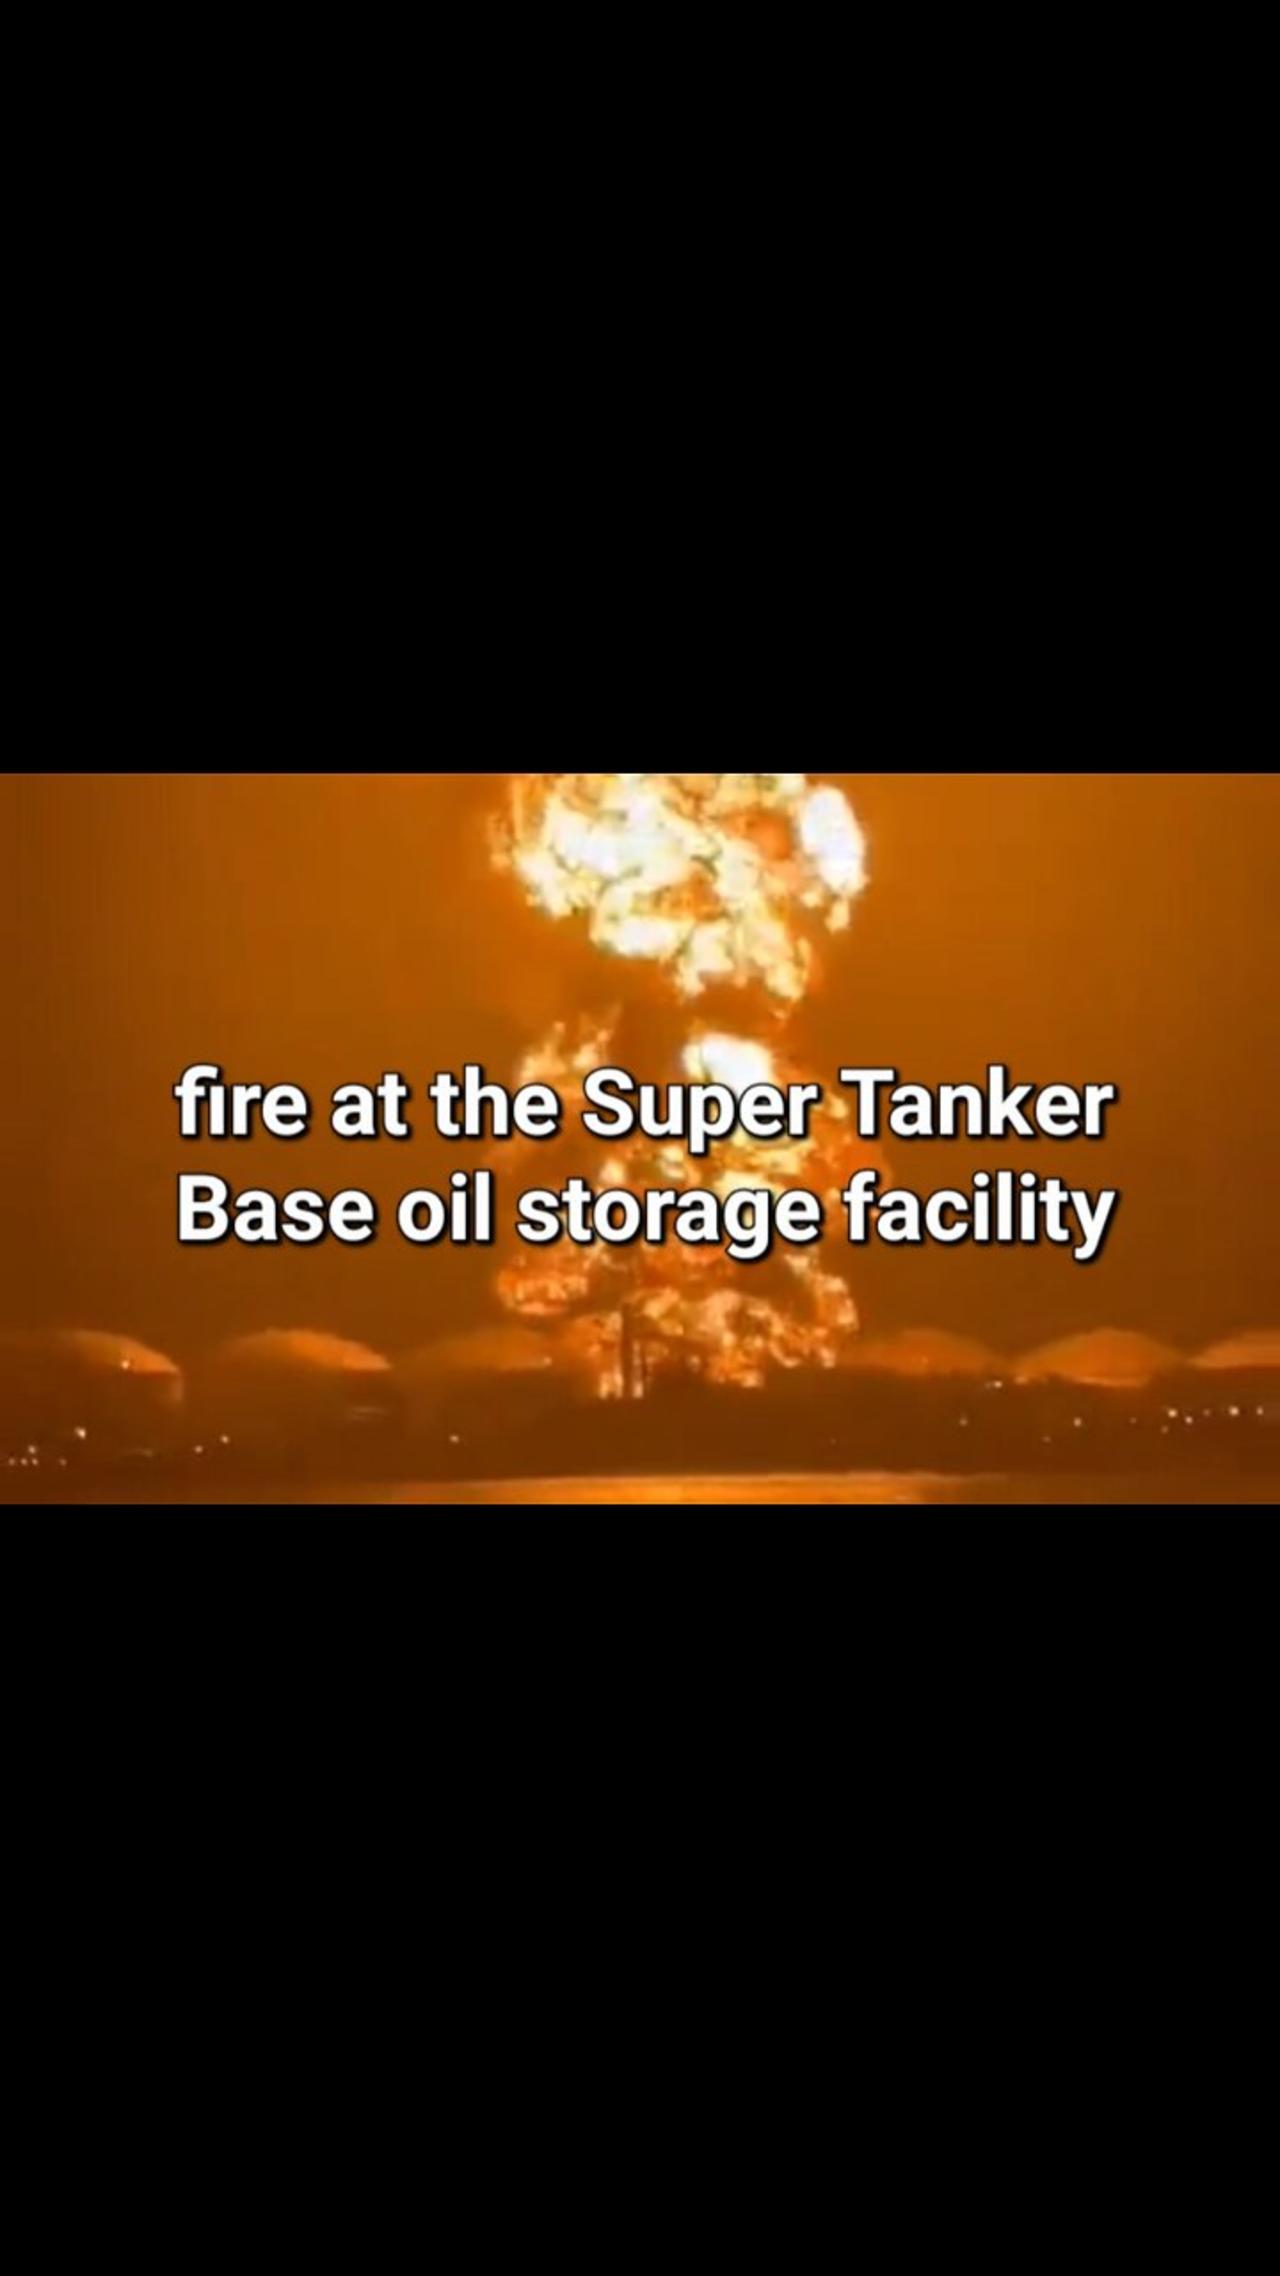 fire at the Super Tanker Base oil storage facility